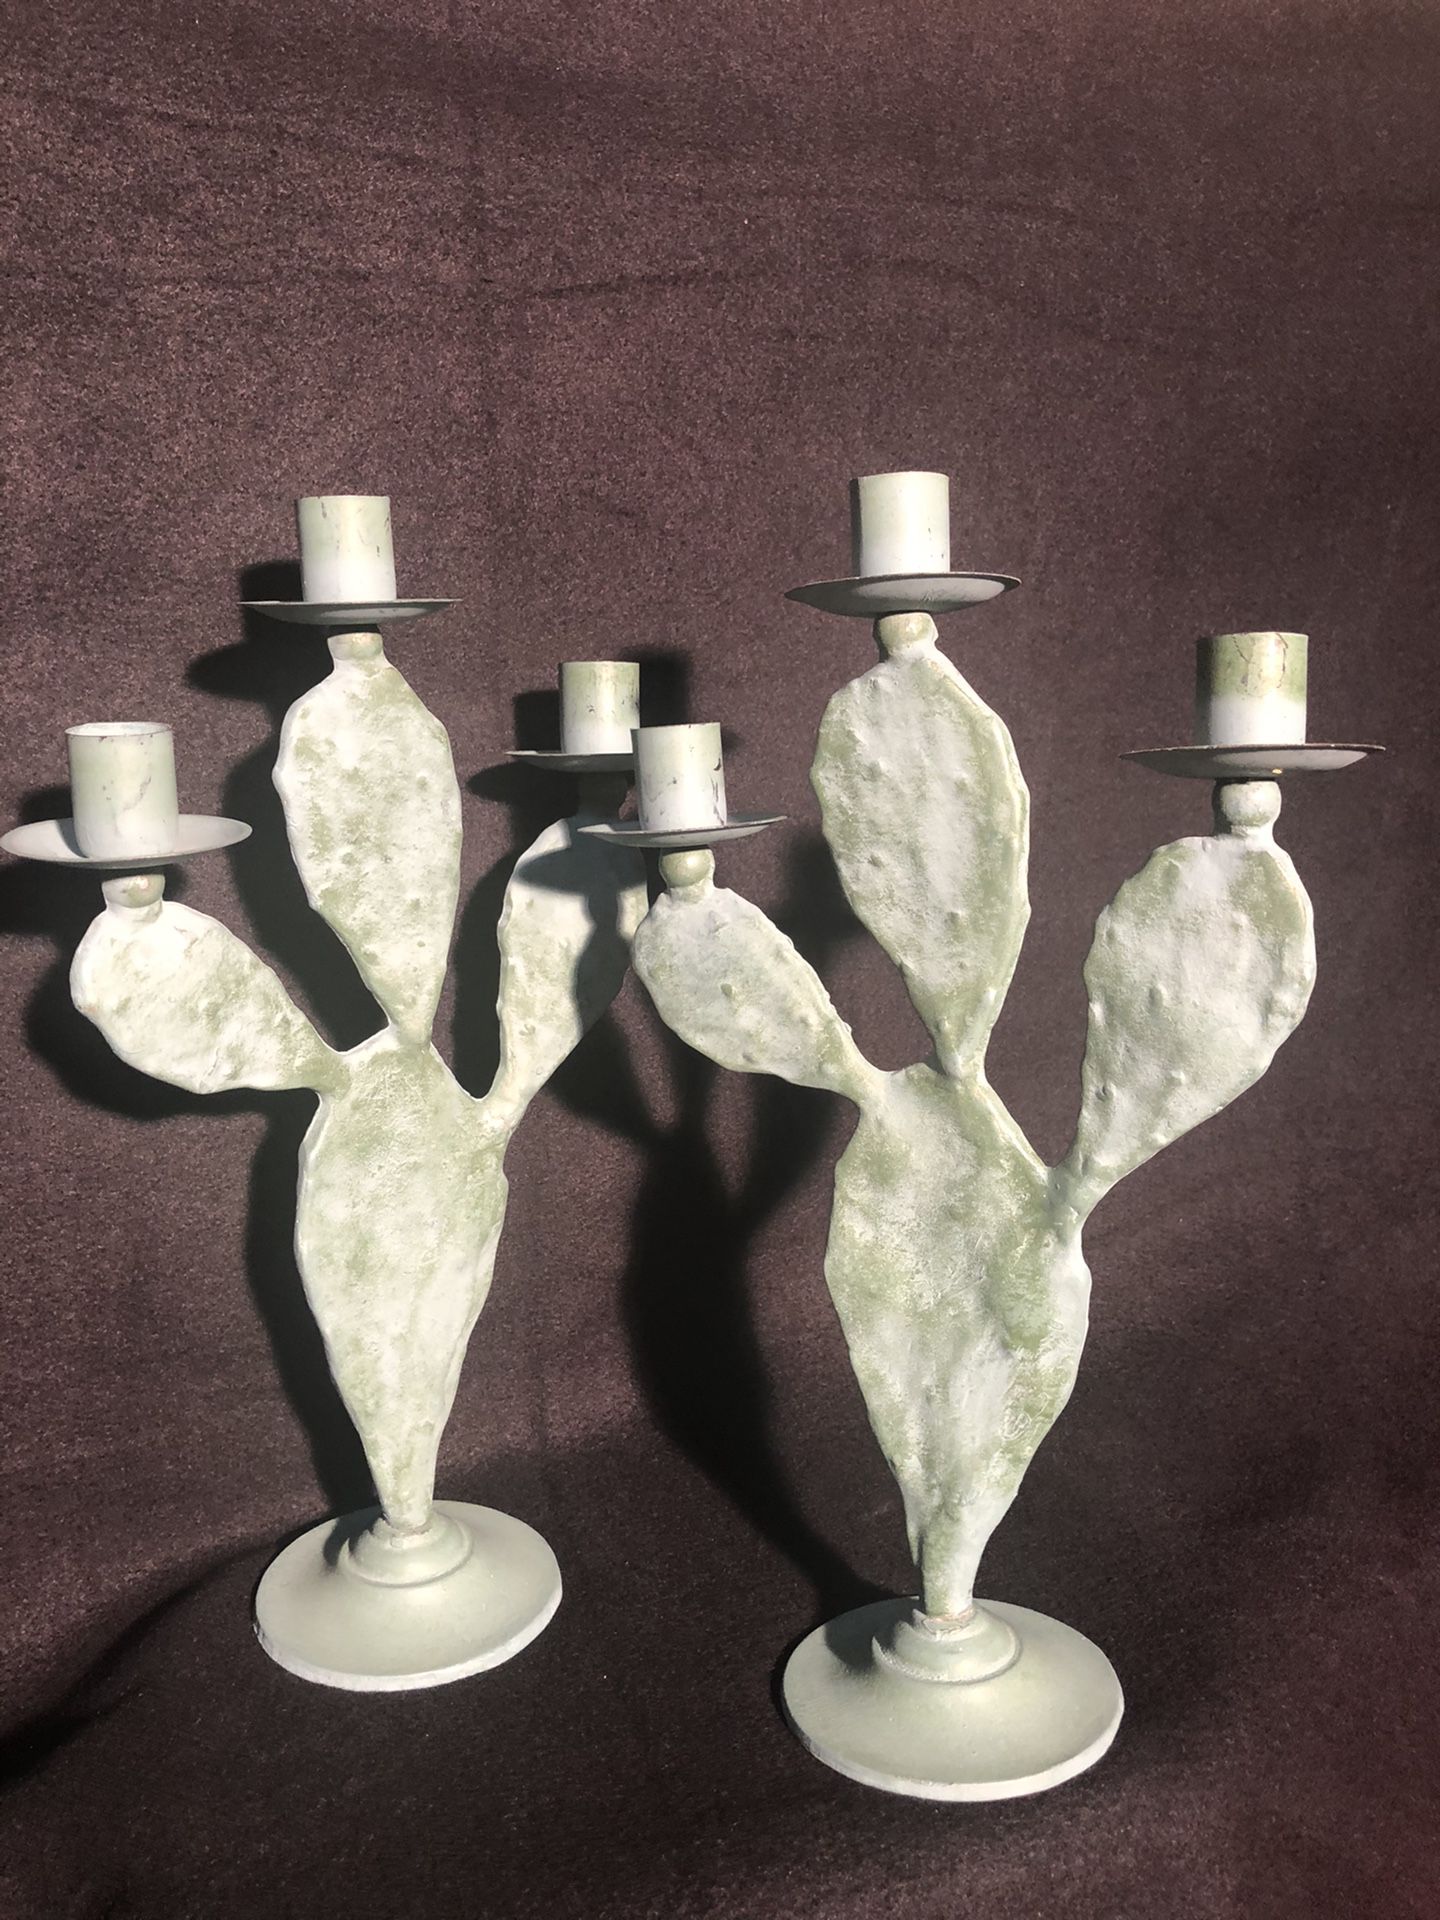 A pair of 7:1/2” cactus candles holders. They hold tapered candles